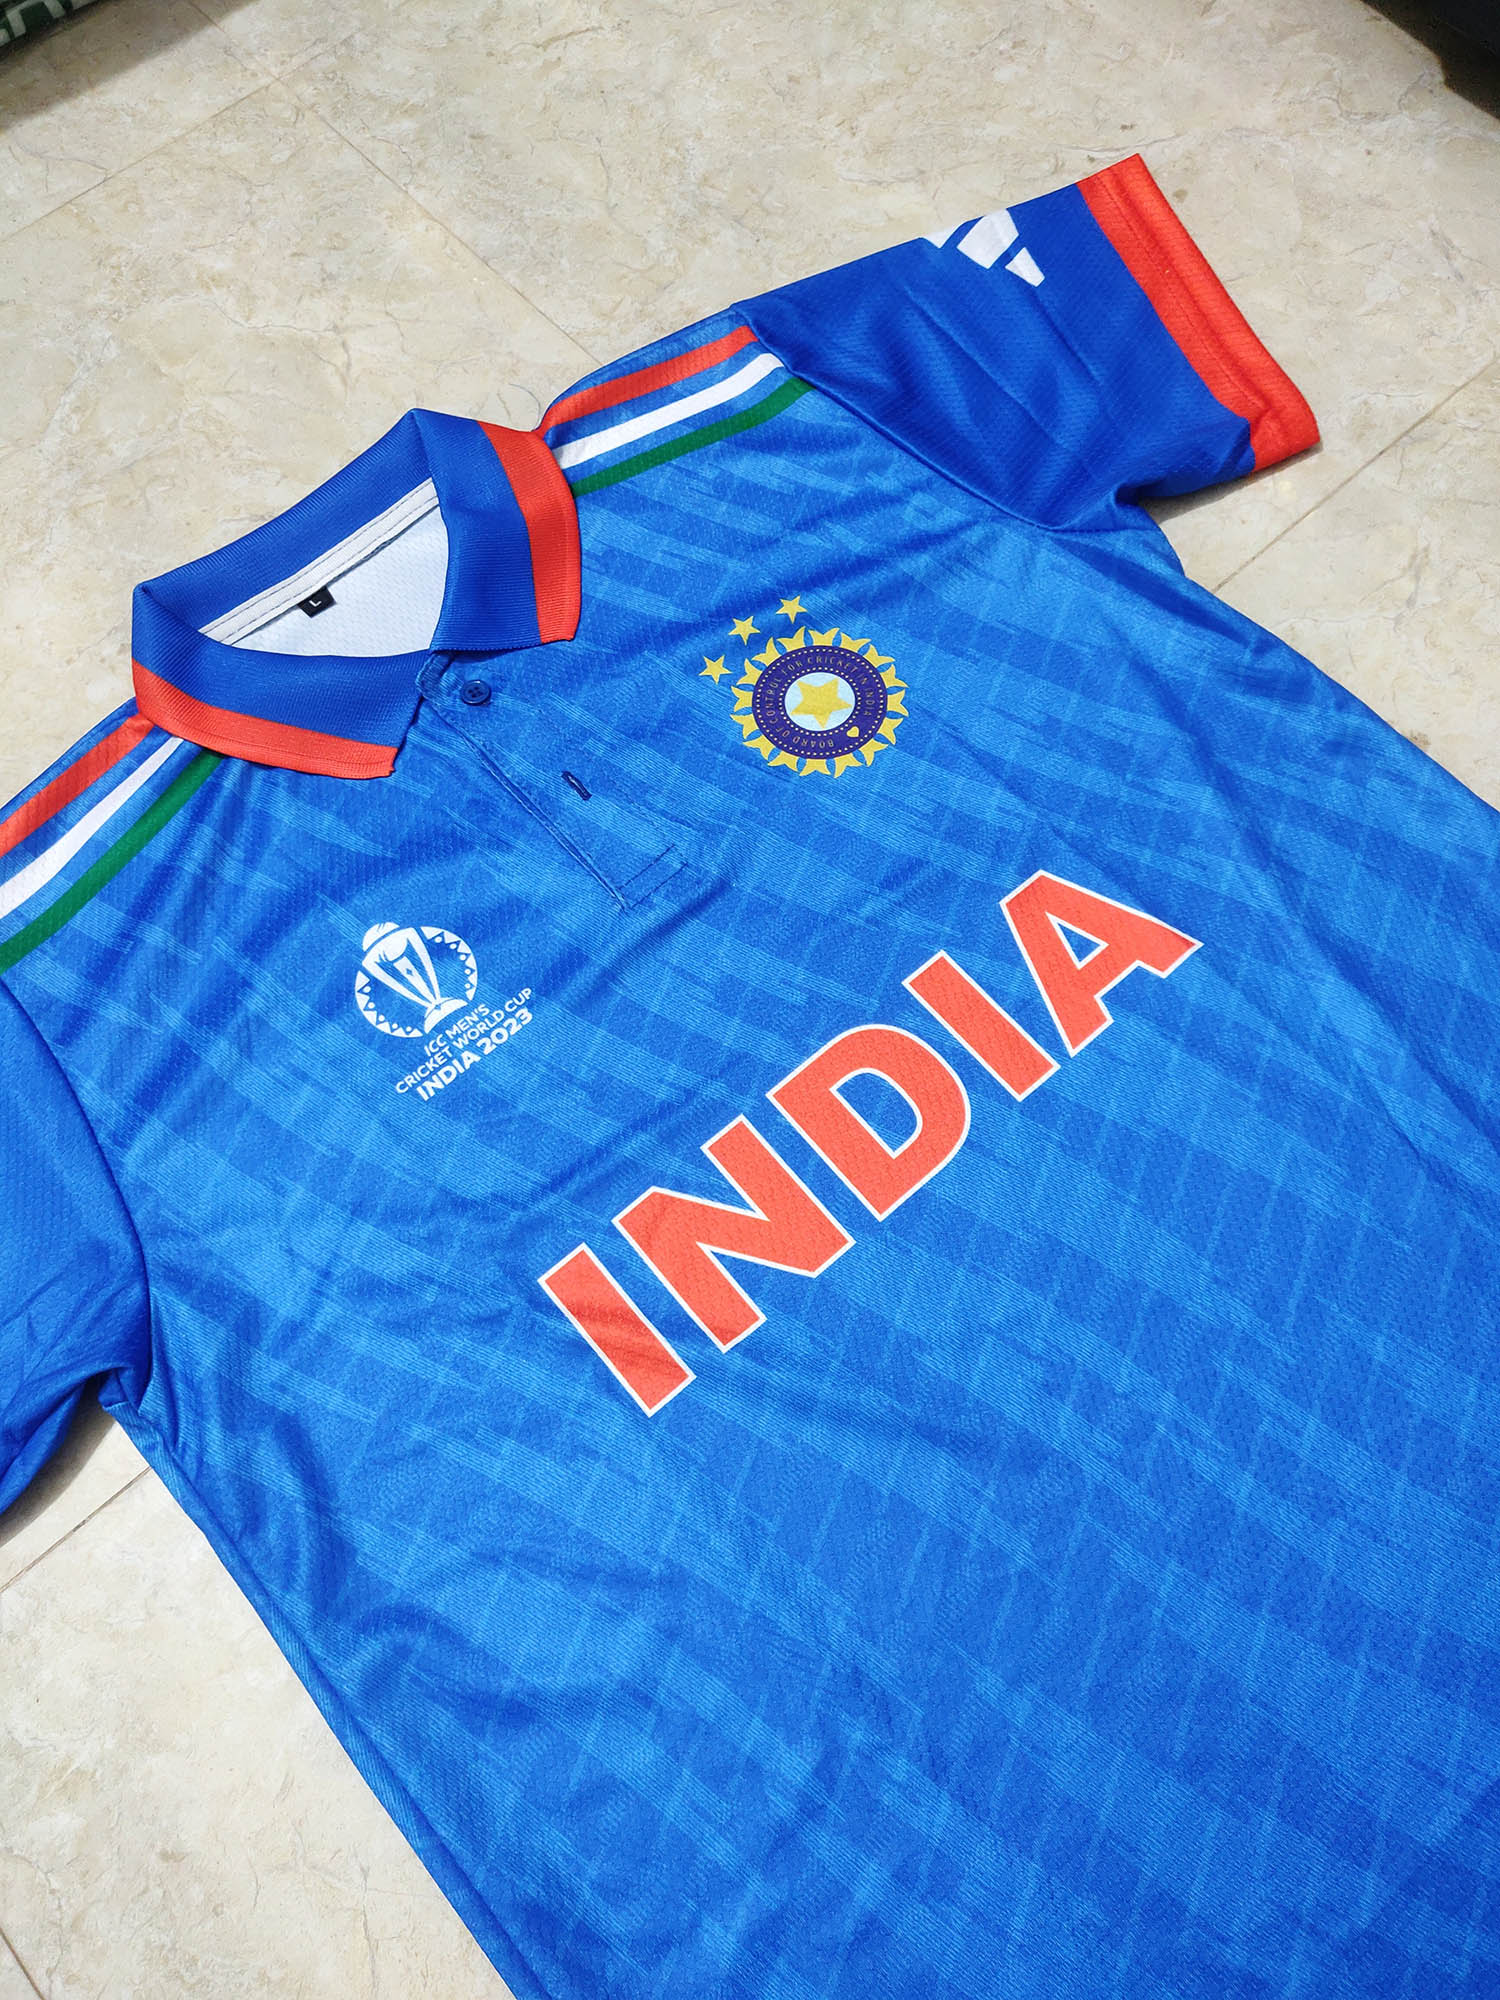 Fans slam BCCI over India's new test jersey featuring Dream11 logo